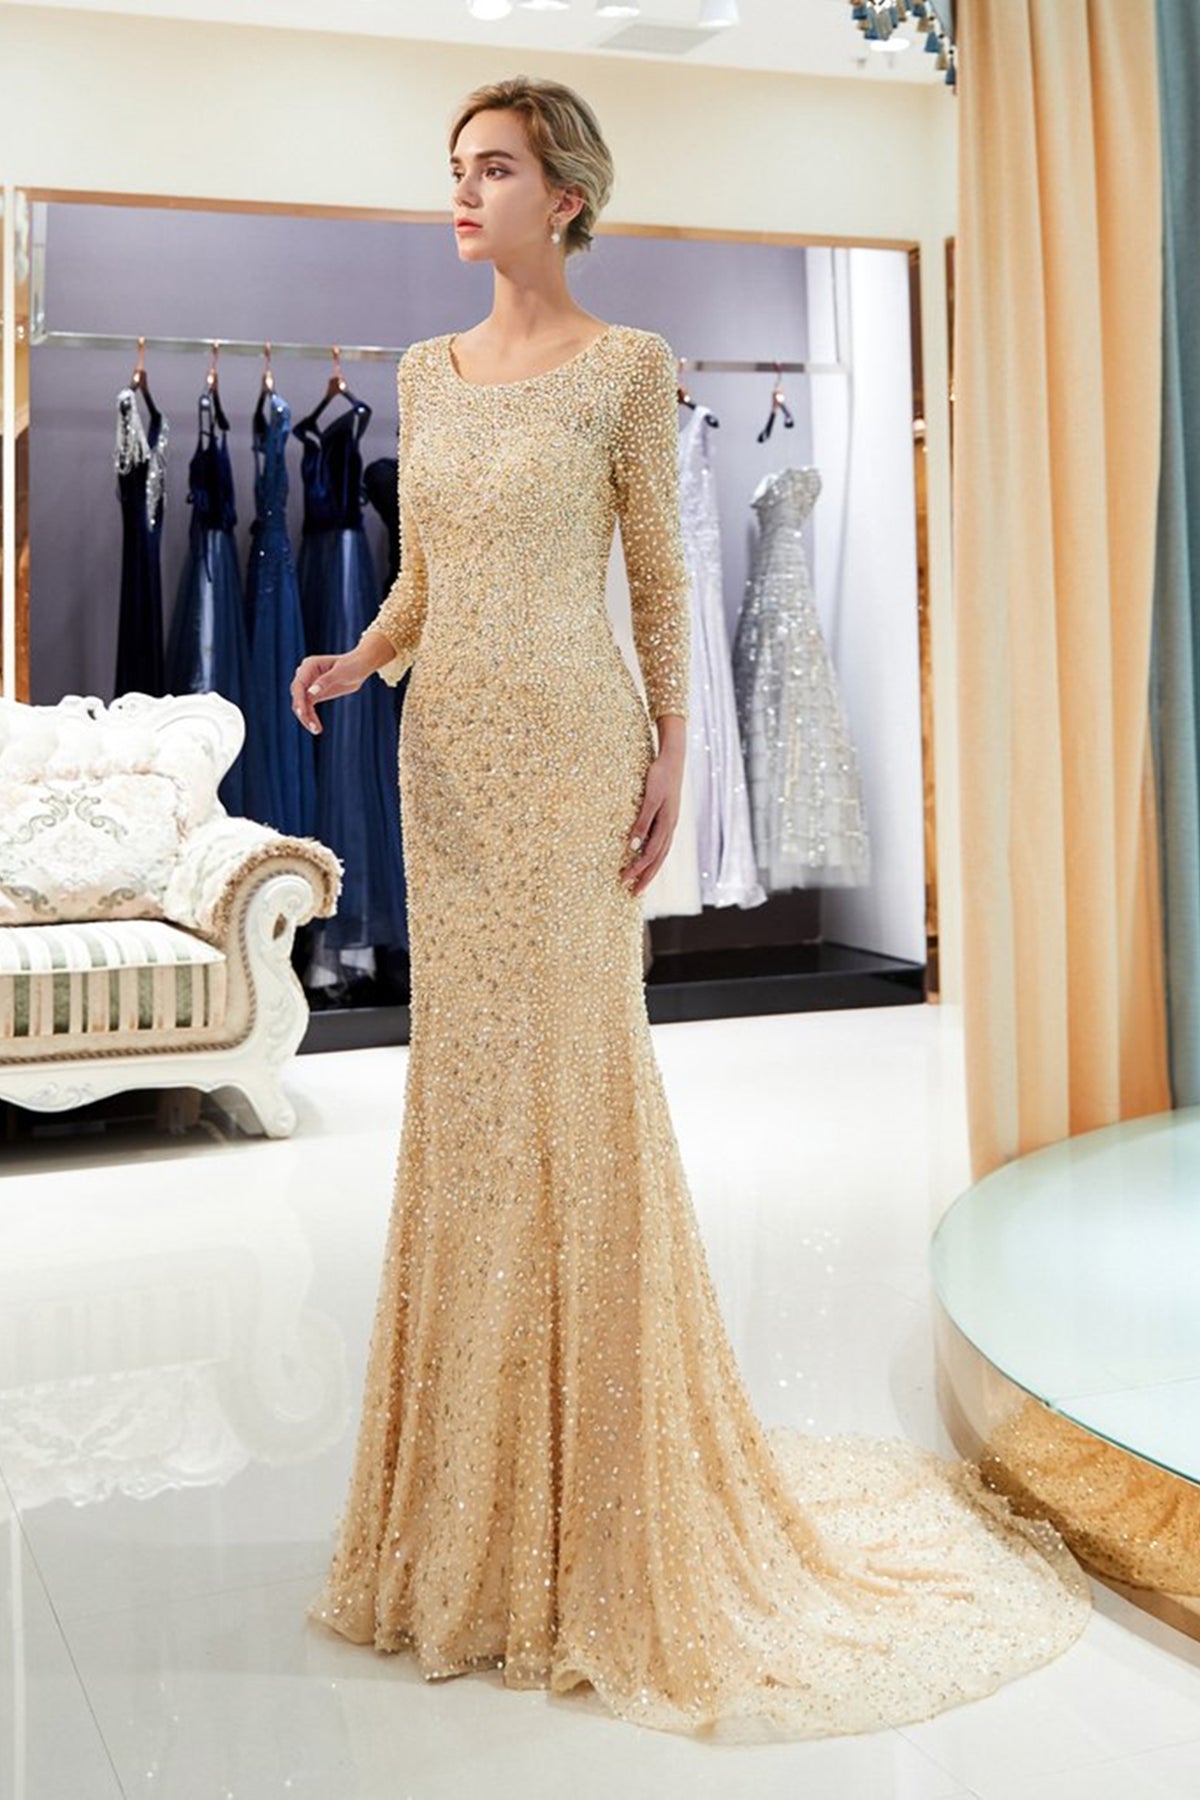 Gorgeous Long Sleeves Open Back Beaded Champagne Long Prom Dresses, Mermaid Champagne Formal Evening Dresses EP1618